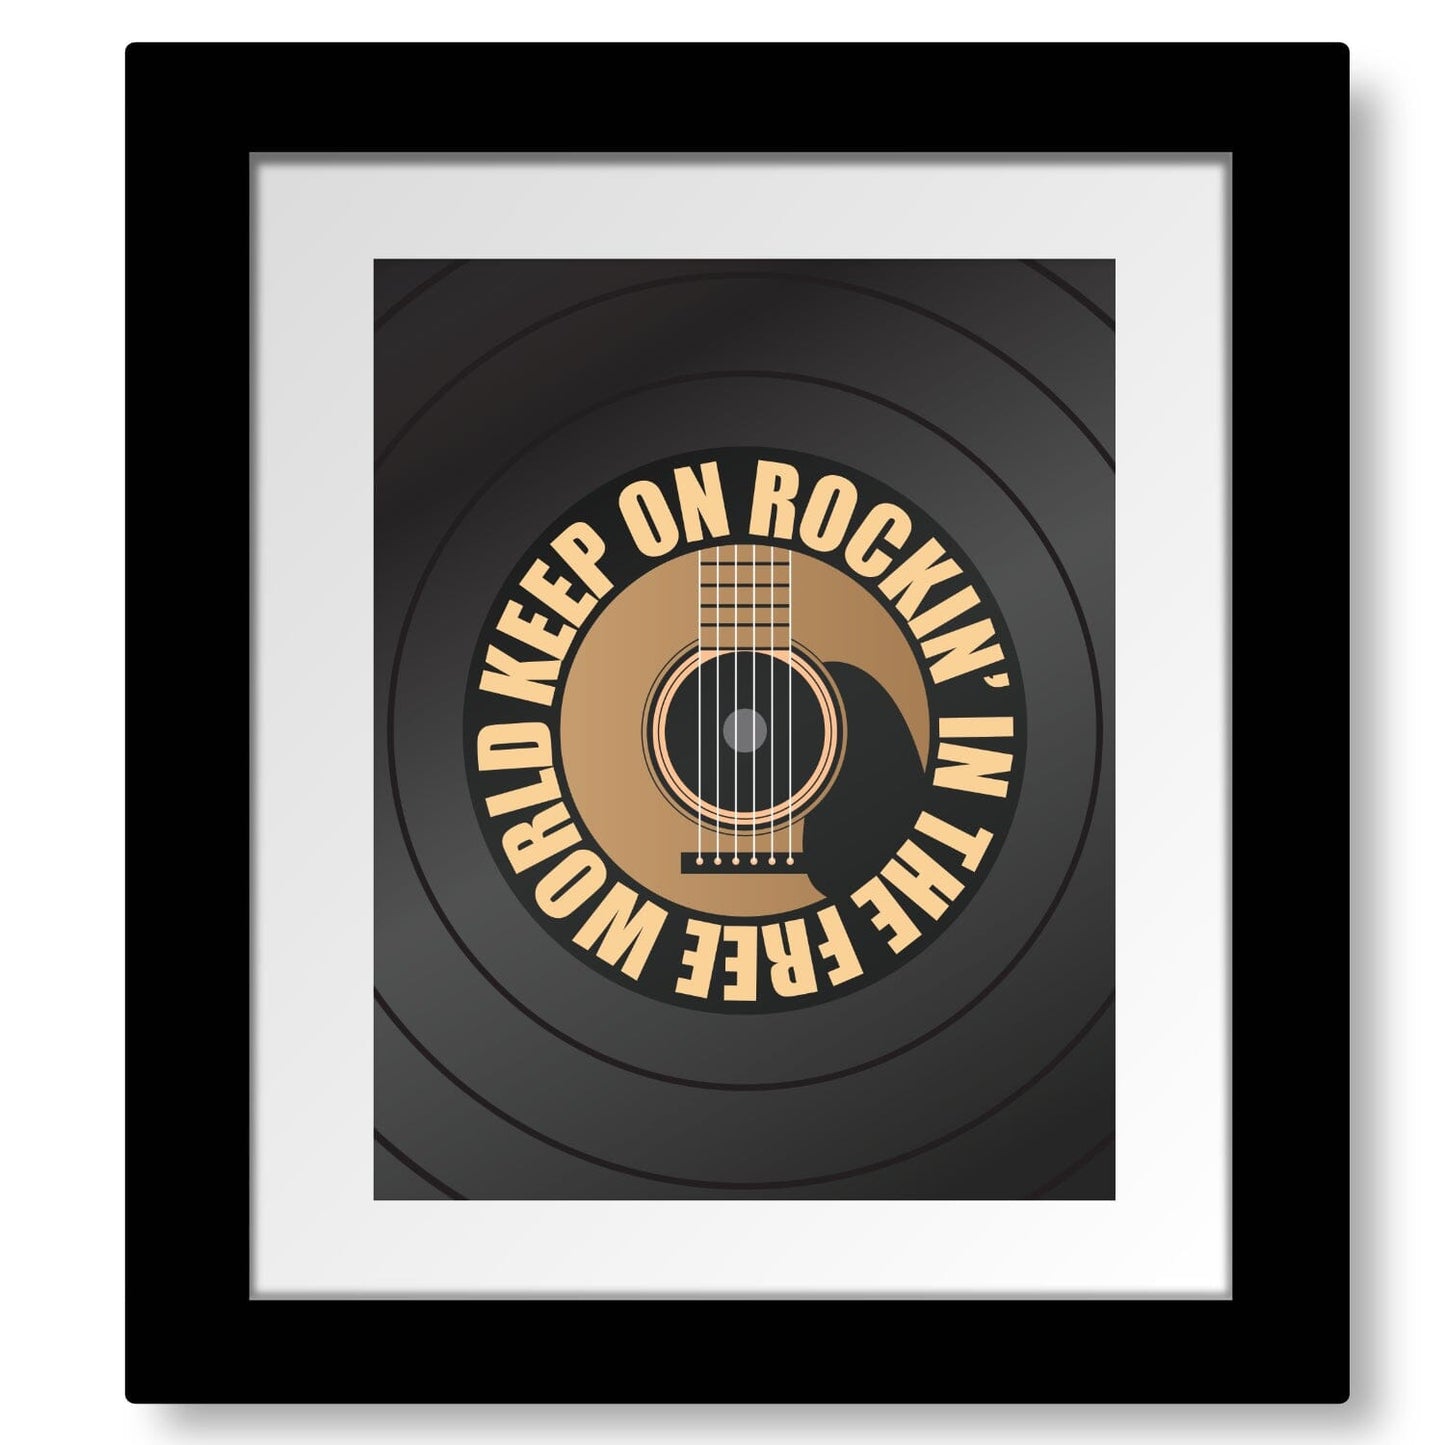 Rockin' in the Free World by Neil Young - Lyric Inspired Art Song Lyrics Art Song Lyrics Art 8x10 Matted and Framed Print 